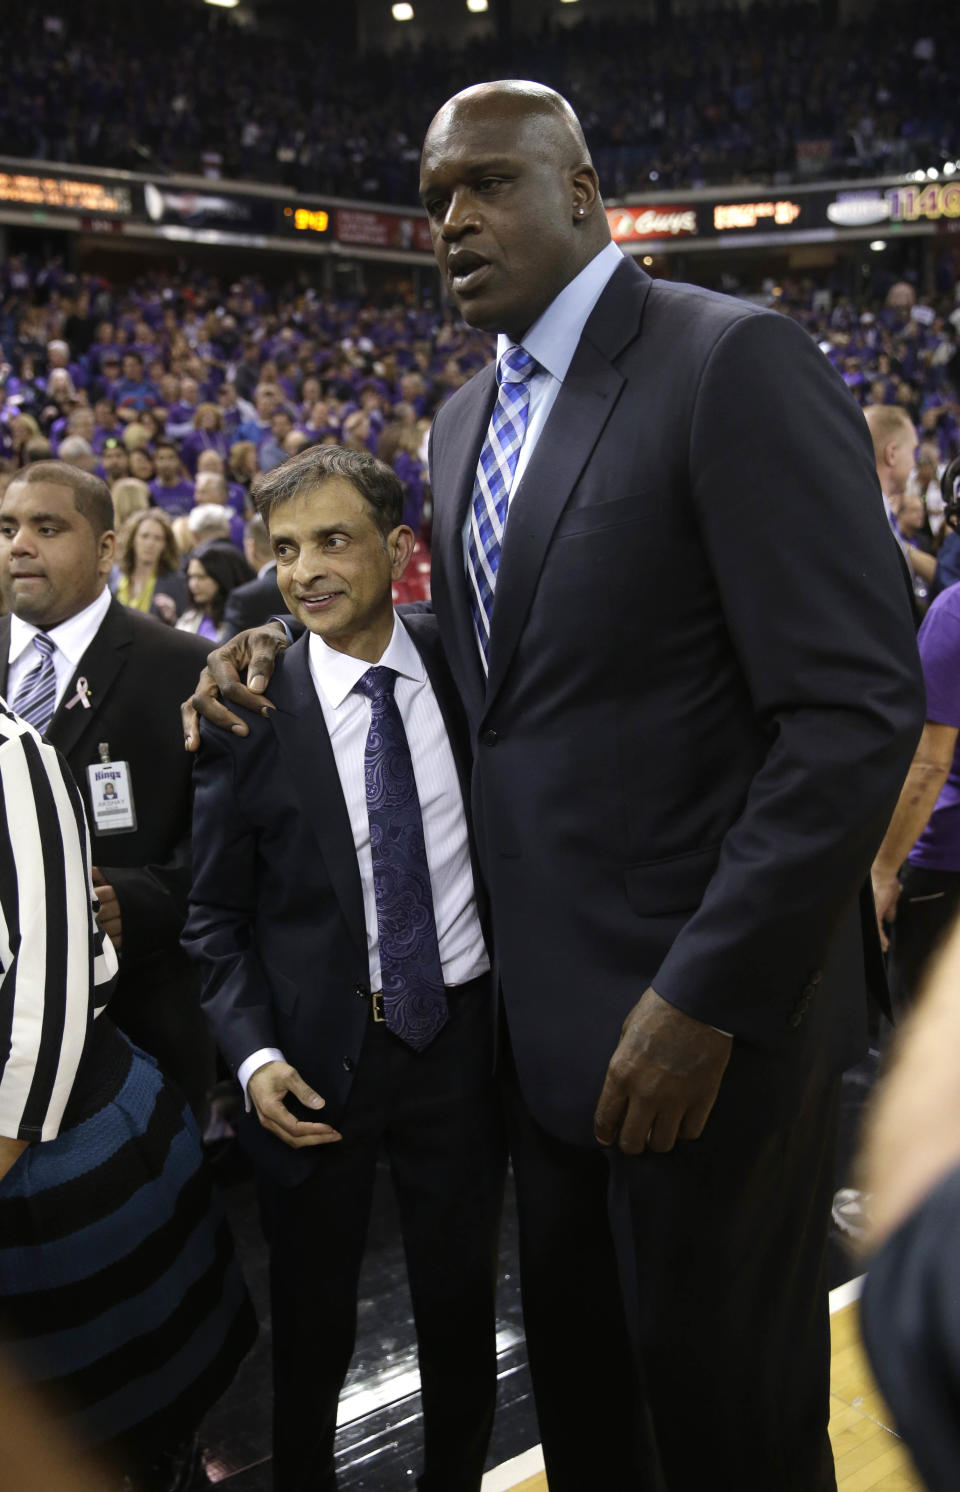 FILE -- In tis Oct. 30, 2013 file photo, Sacramento Kings majority owner Vivek Ranadive, left, and former NBA center Shaquille O'Neal, a minority owner of the Kings, celebrate after the team defeated the Denver Nuggets 90-88 in an NBA preseason basketball game in Sacramento, Calif. Ranadive, a successful Silicon Valley software pioneer, emerged at the intersection of politics and sports last year as he led a consortium of owners to purchase the Sacramento Kings, becoming the leagues first Indian-American owner.(AP Photo/Rich Pedroncelli, file)